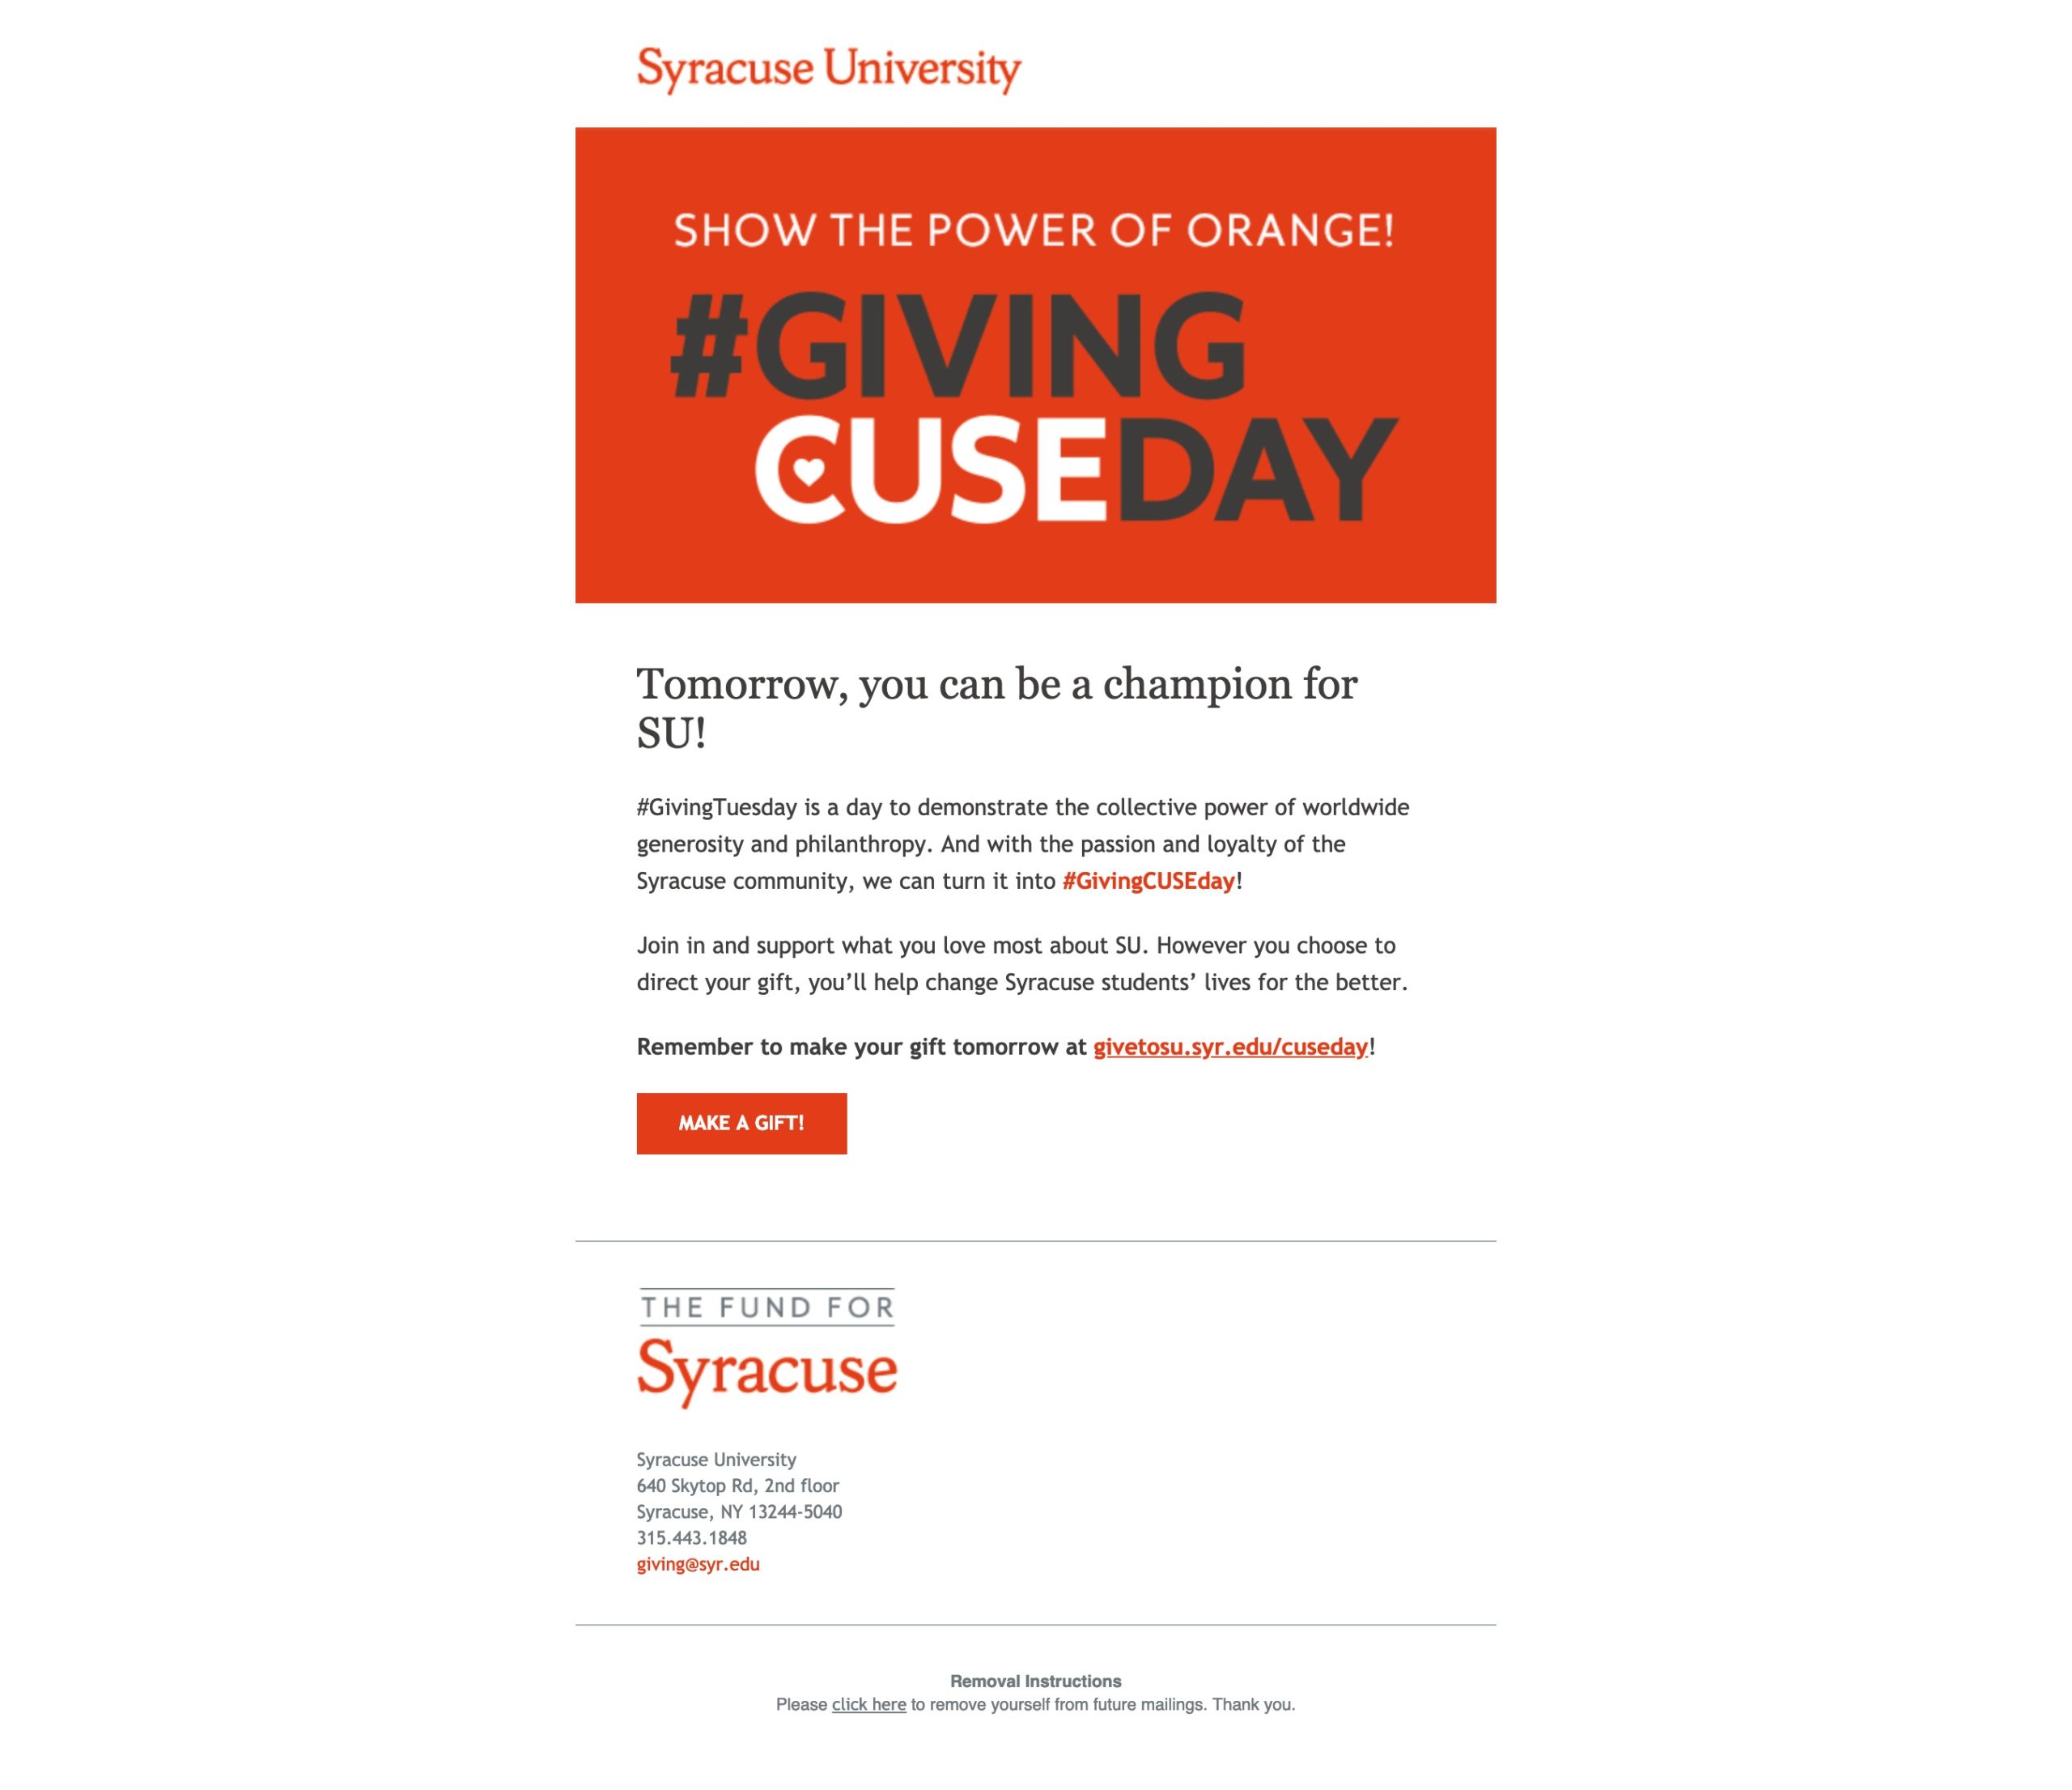 Take it a step further and integrate your email and social media campaigns into one. Check out this recent example from Syracuse University.